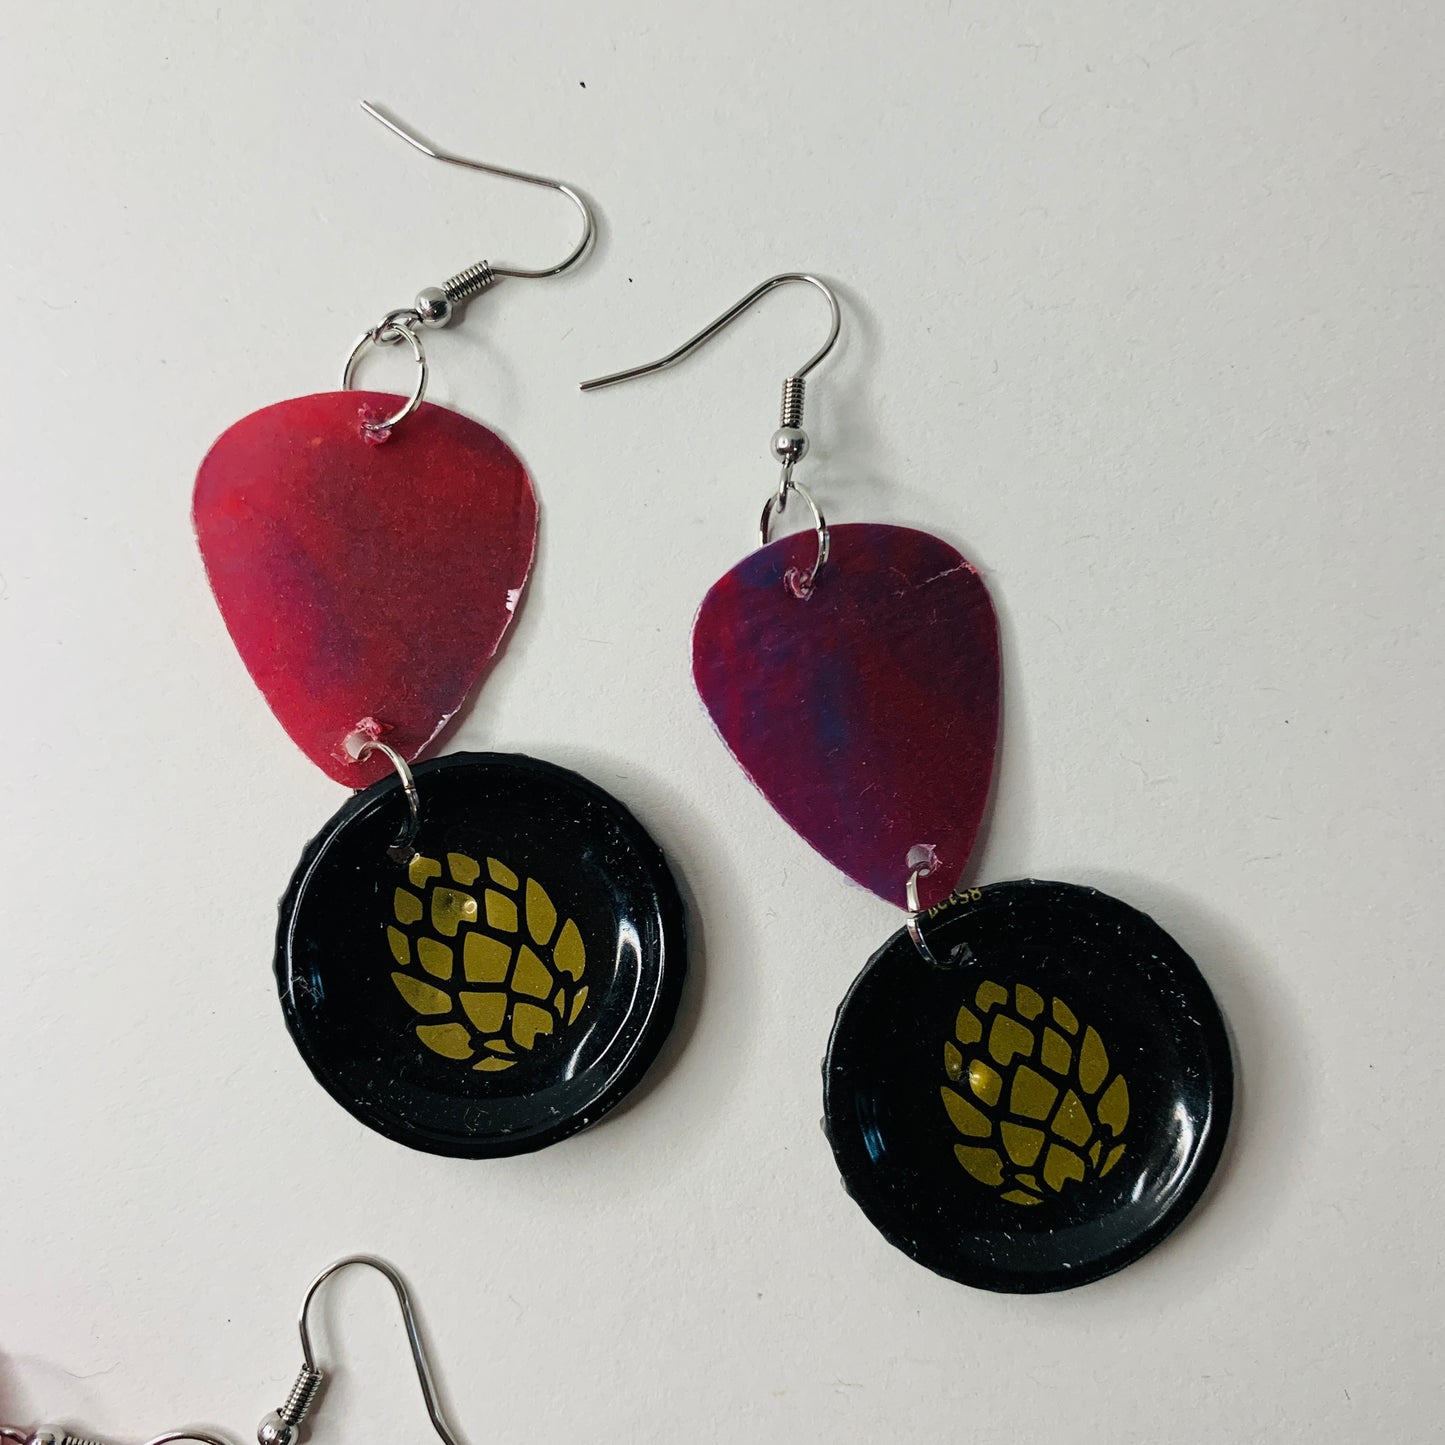 Cheers! Recycled Bottle Top and Cap earrings